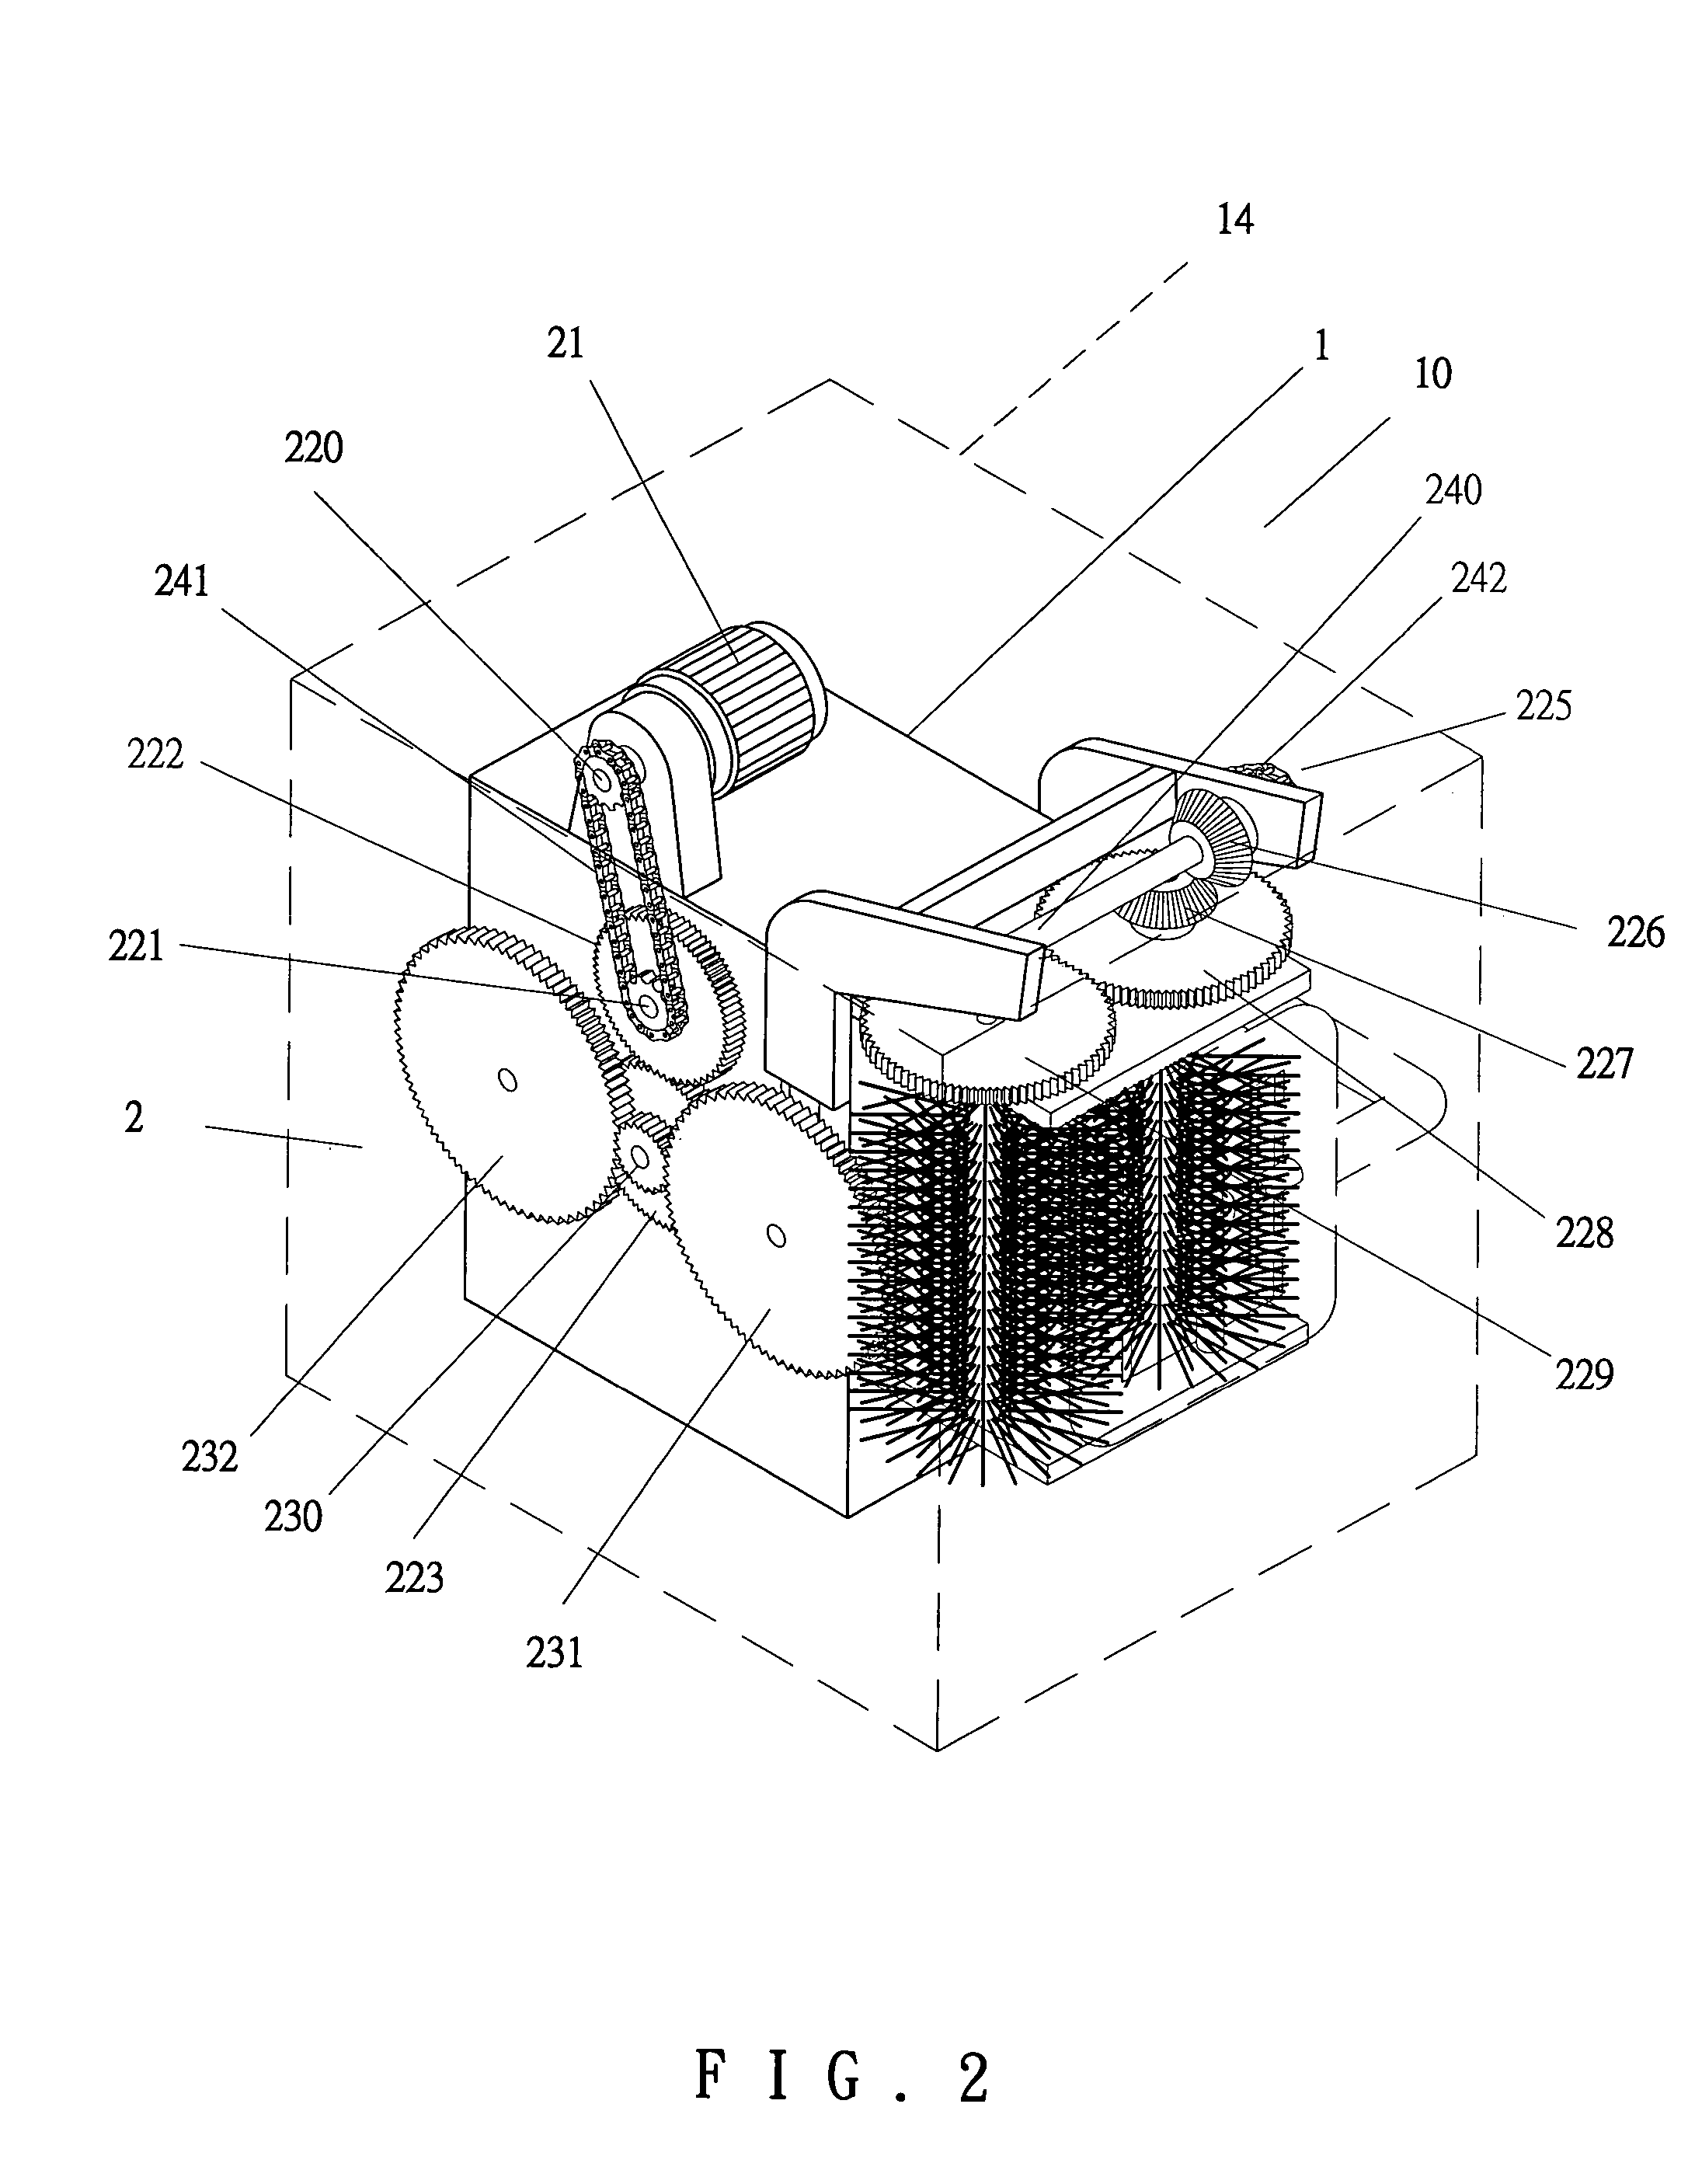 Filter cartridge cleaning apparatus